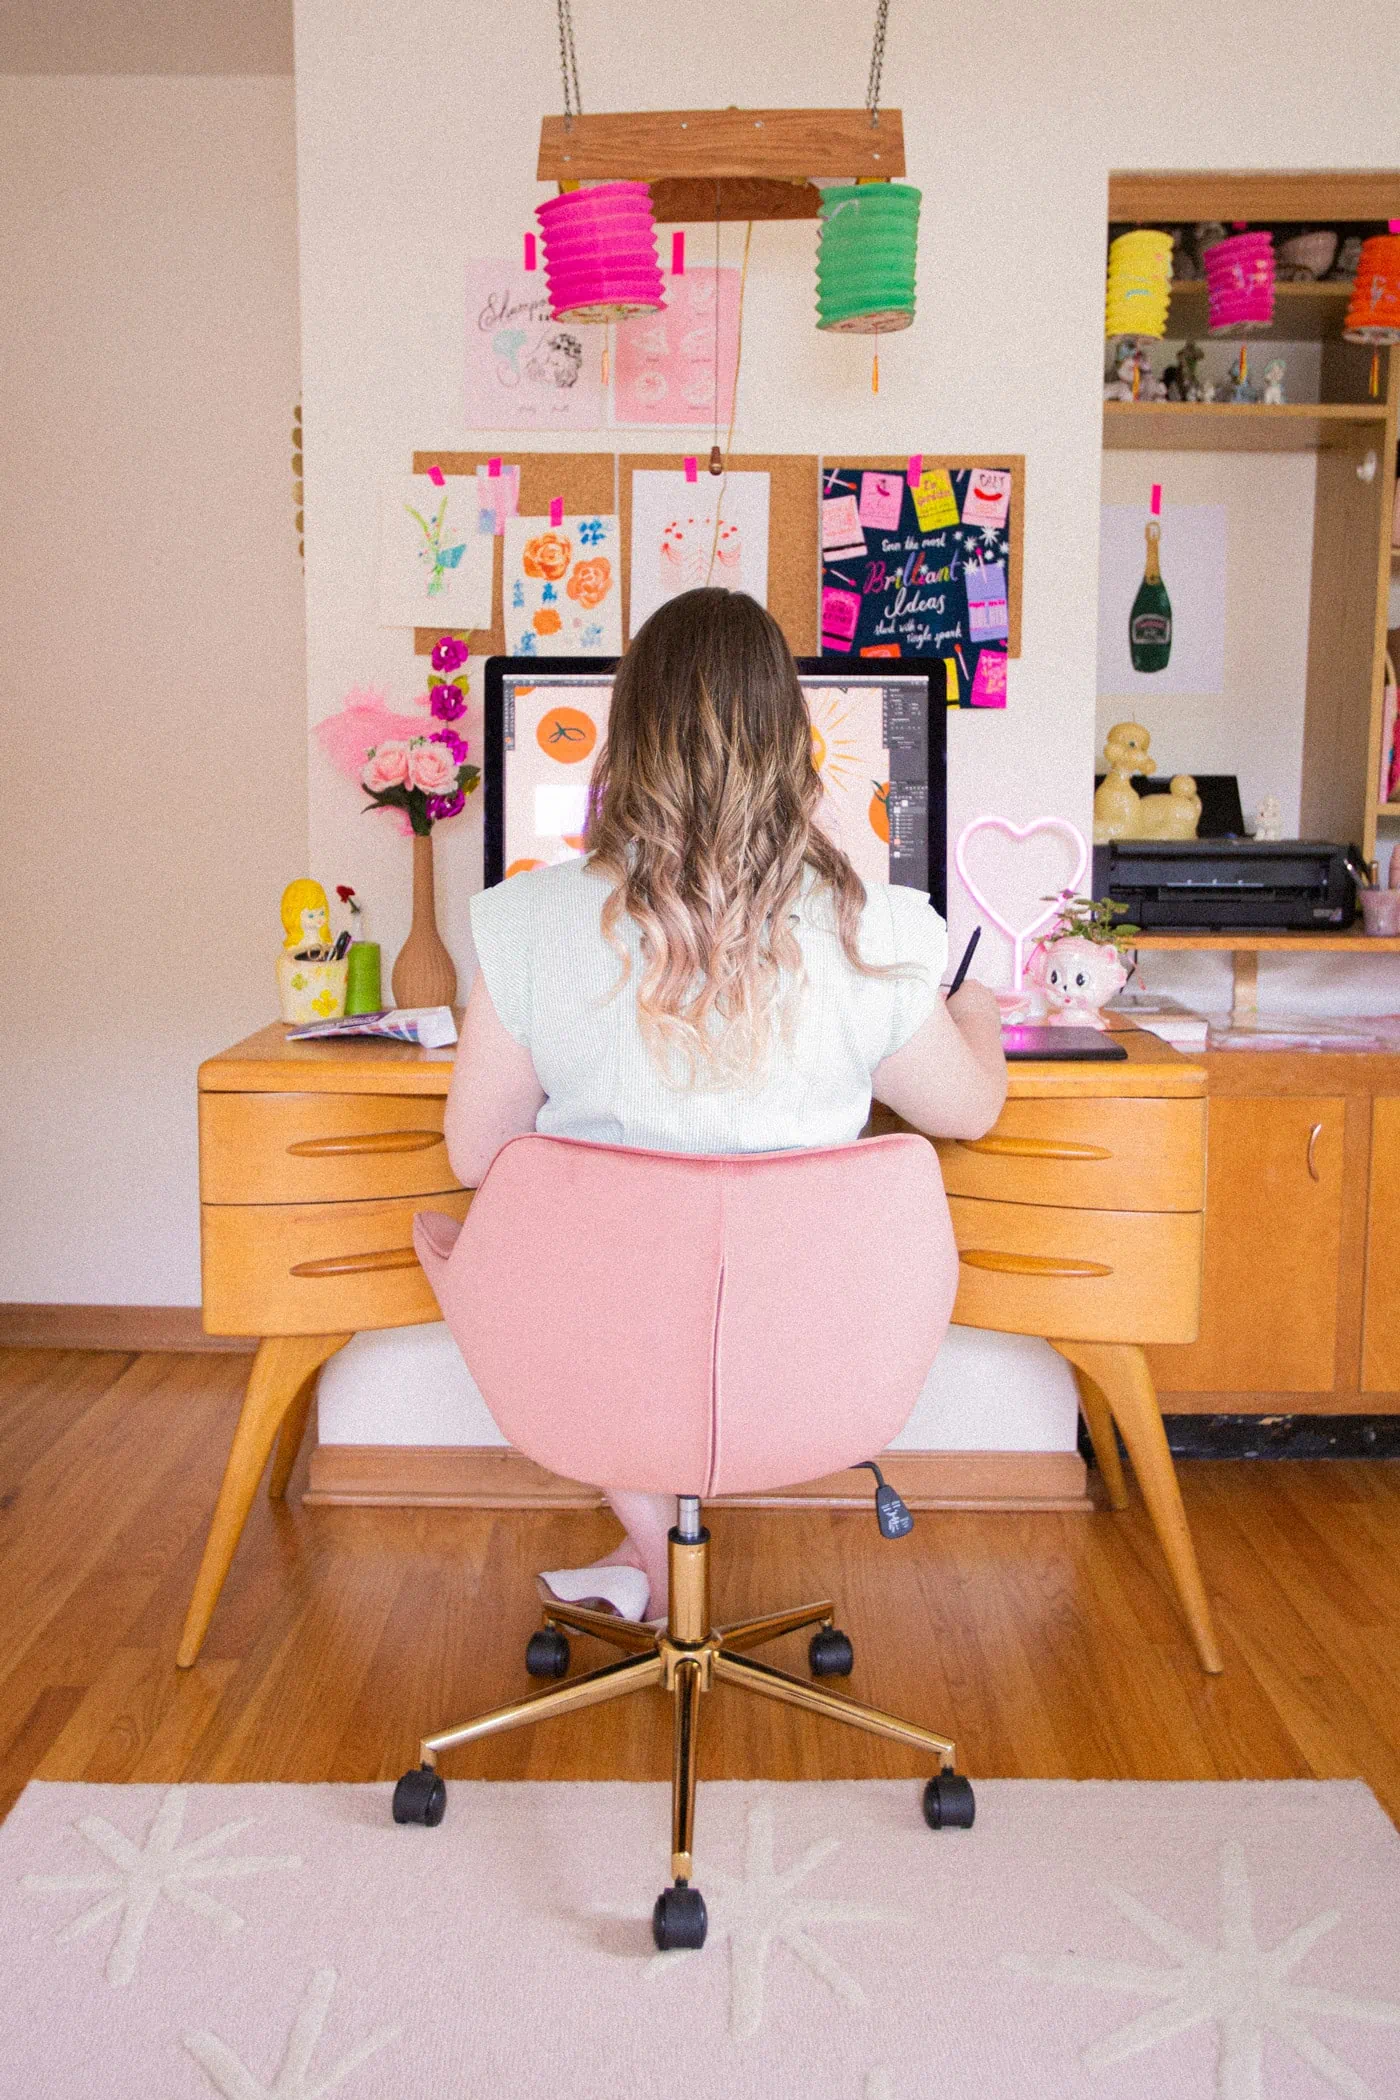 Shot of Louise sitting at her desk from behind. The image is symmetrically composed and a corkboard with colorful notes and drawings hangs against the wall.